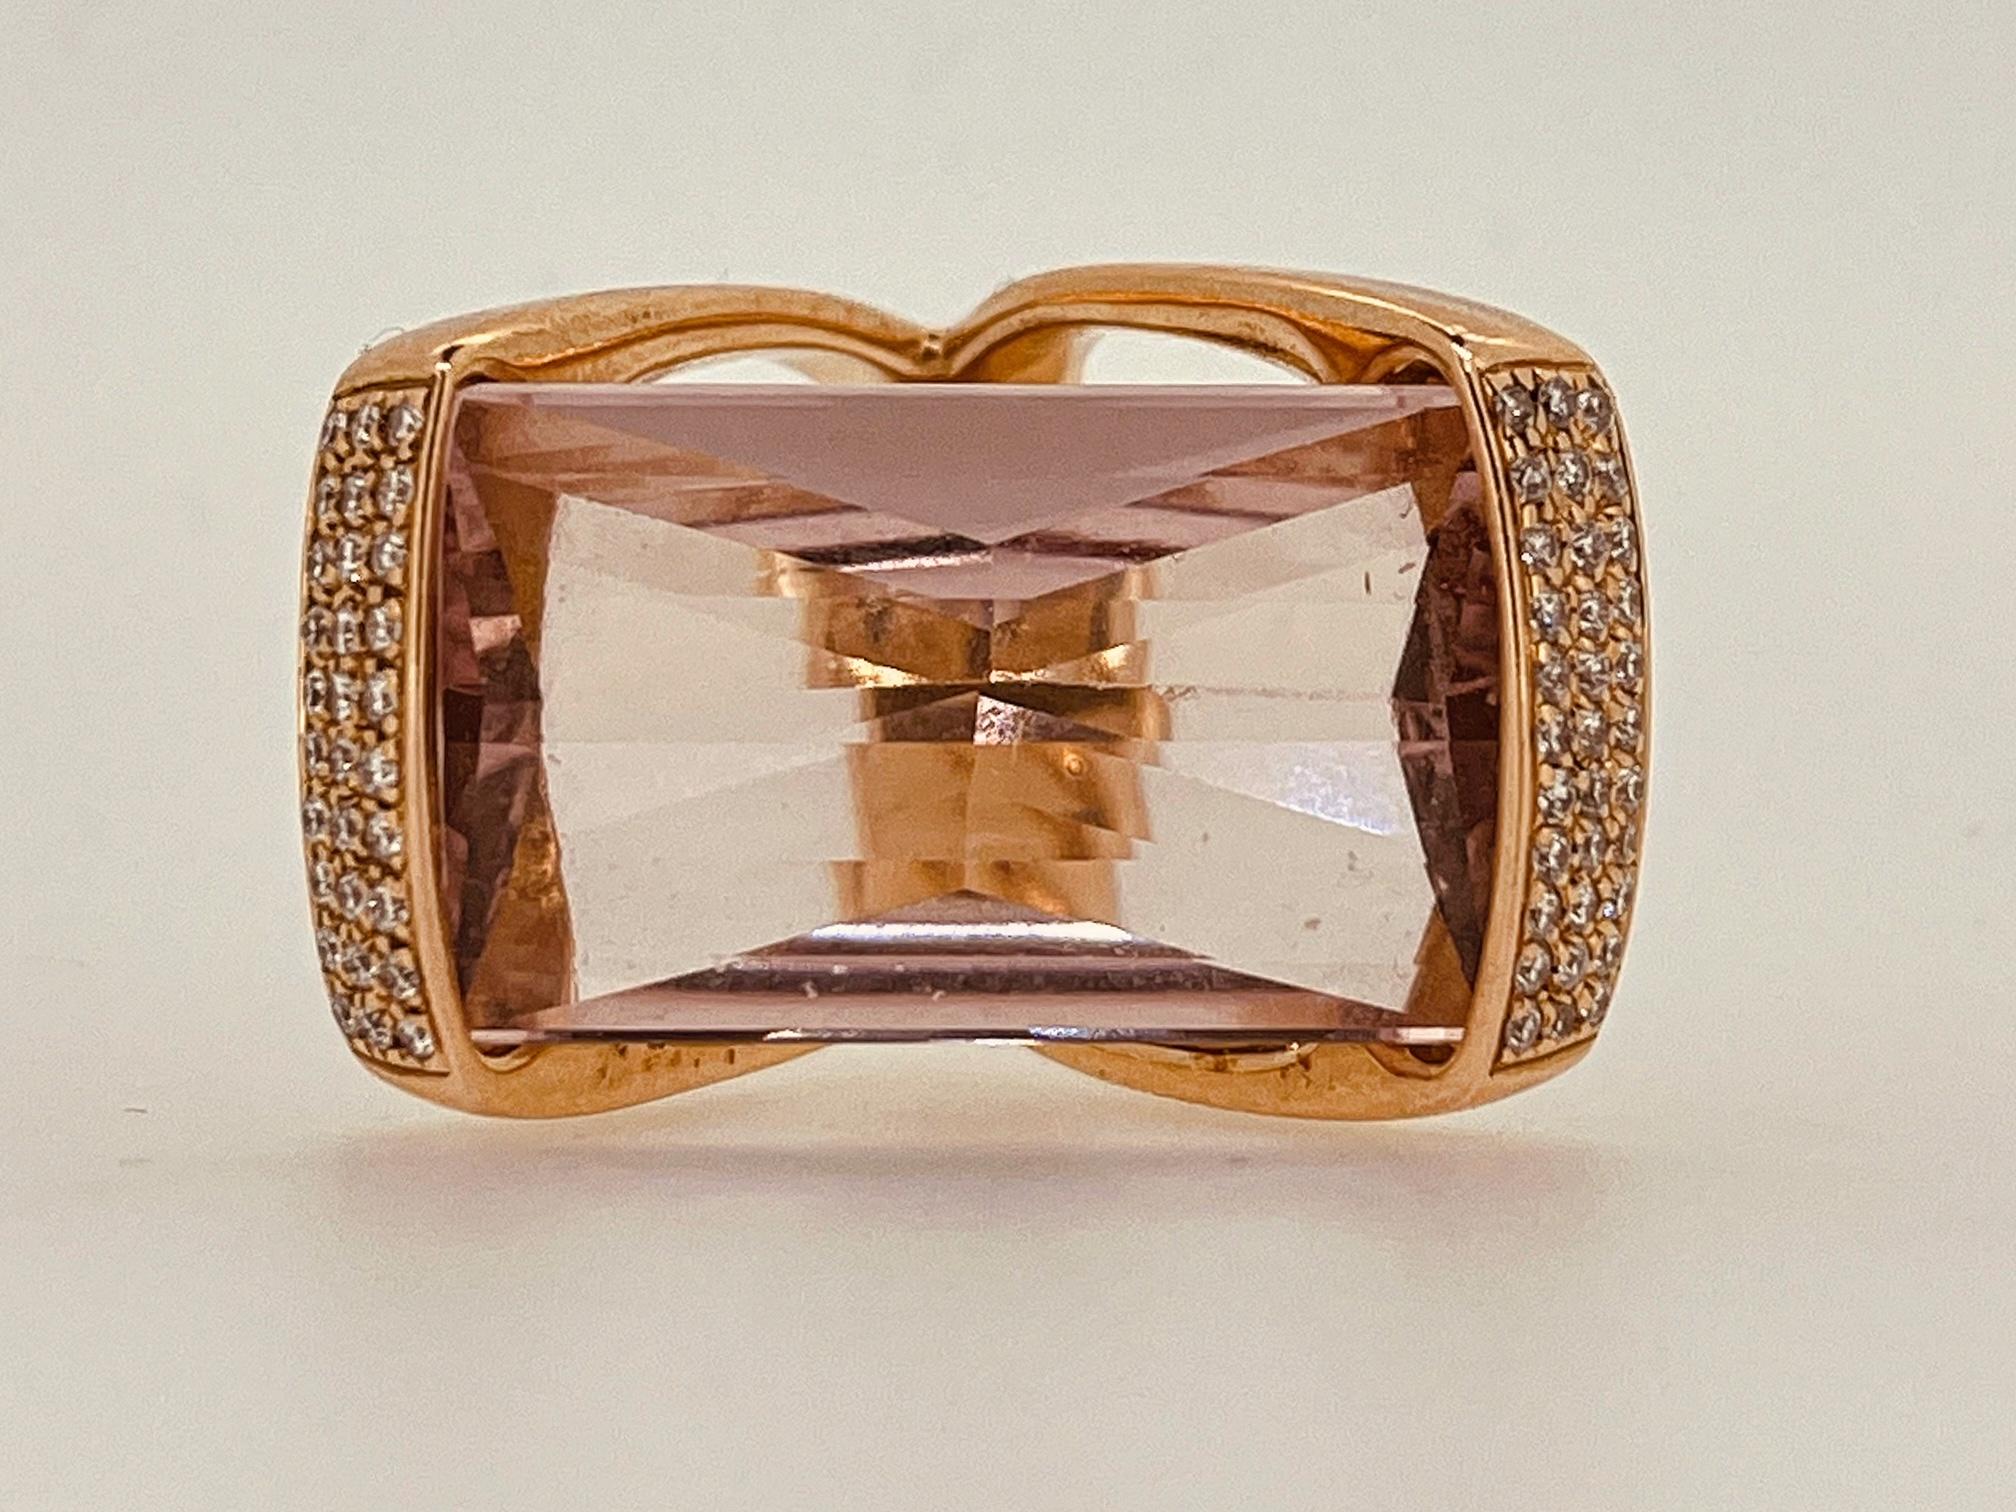 Gavello 18ct yellow gold ring centering a square cut 22ct morganite suspended by a row of pave diamonds on each end. Diamond weight 0.9ct, round brilliant cut. Ring is resizable. Size: L1/2 (UK), 52.5 (EU), 6.75 (US), 16.5mm (inside ring diameter),